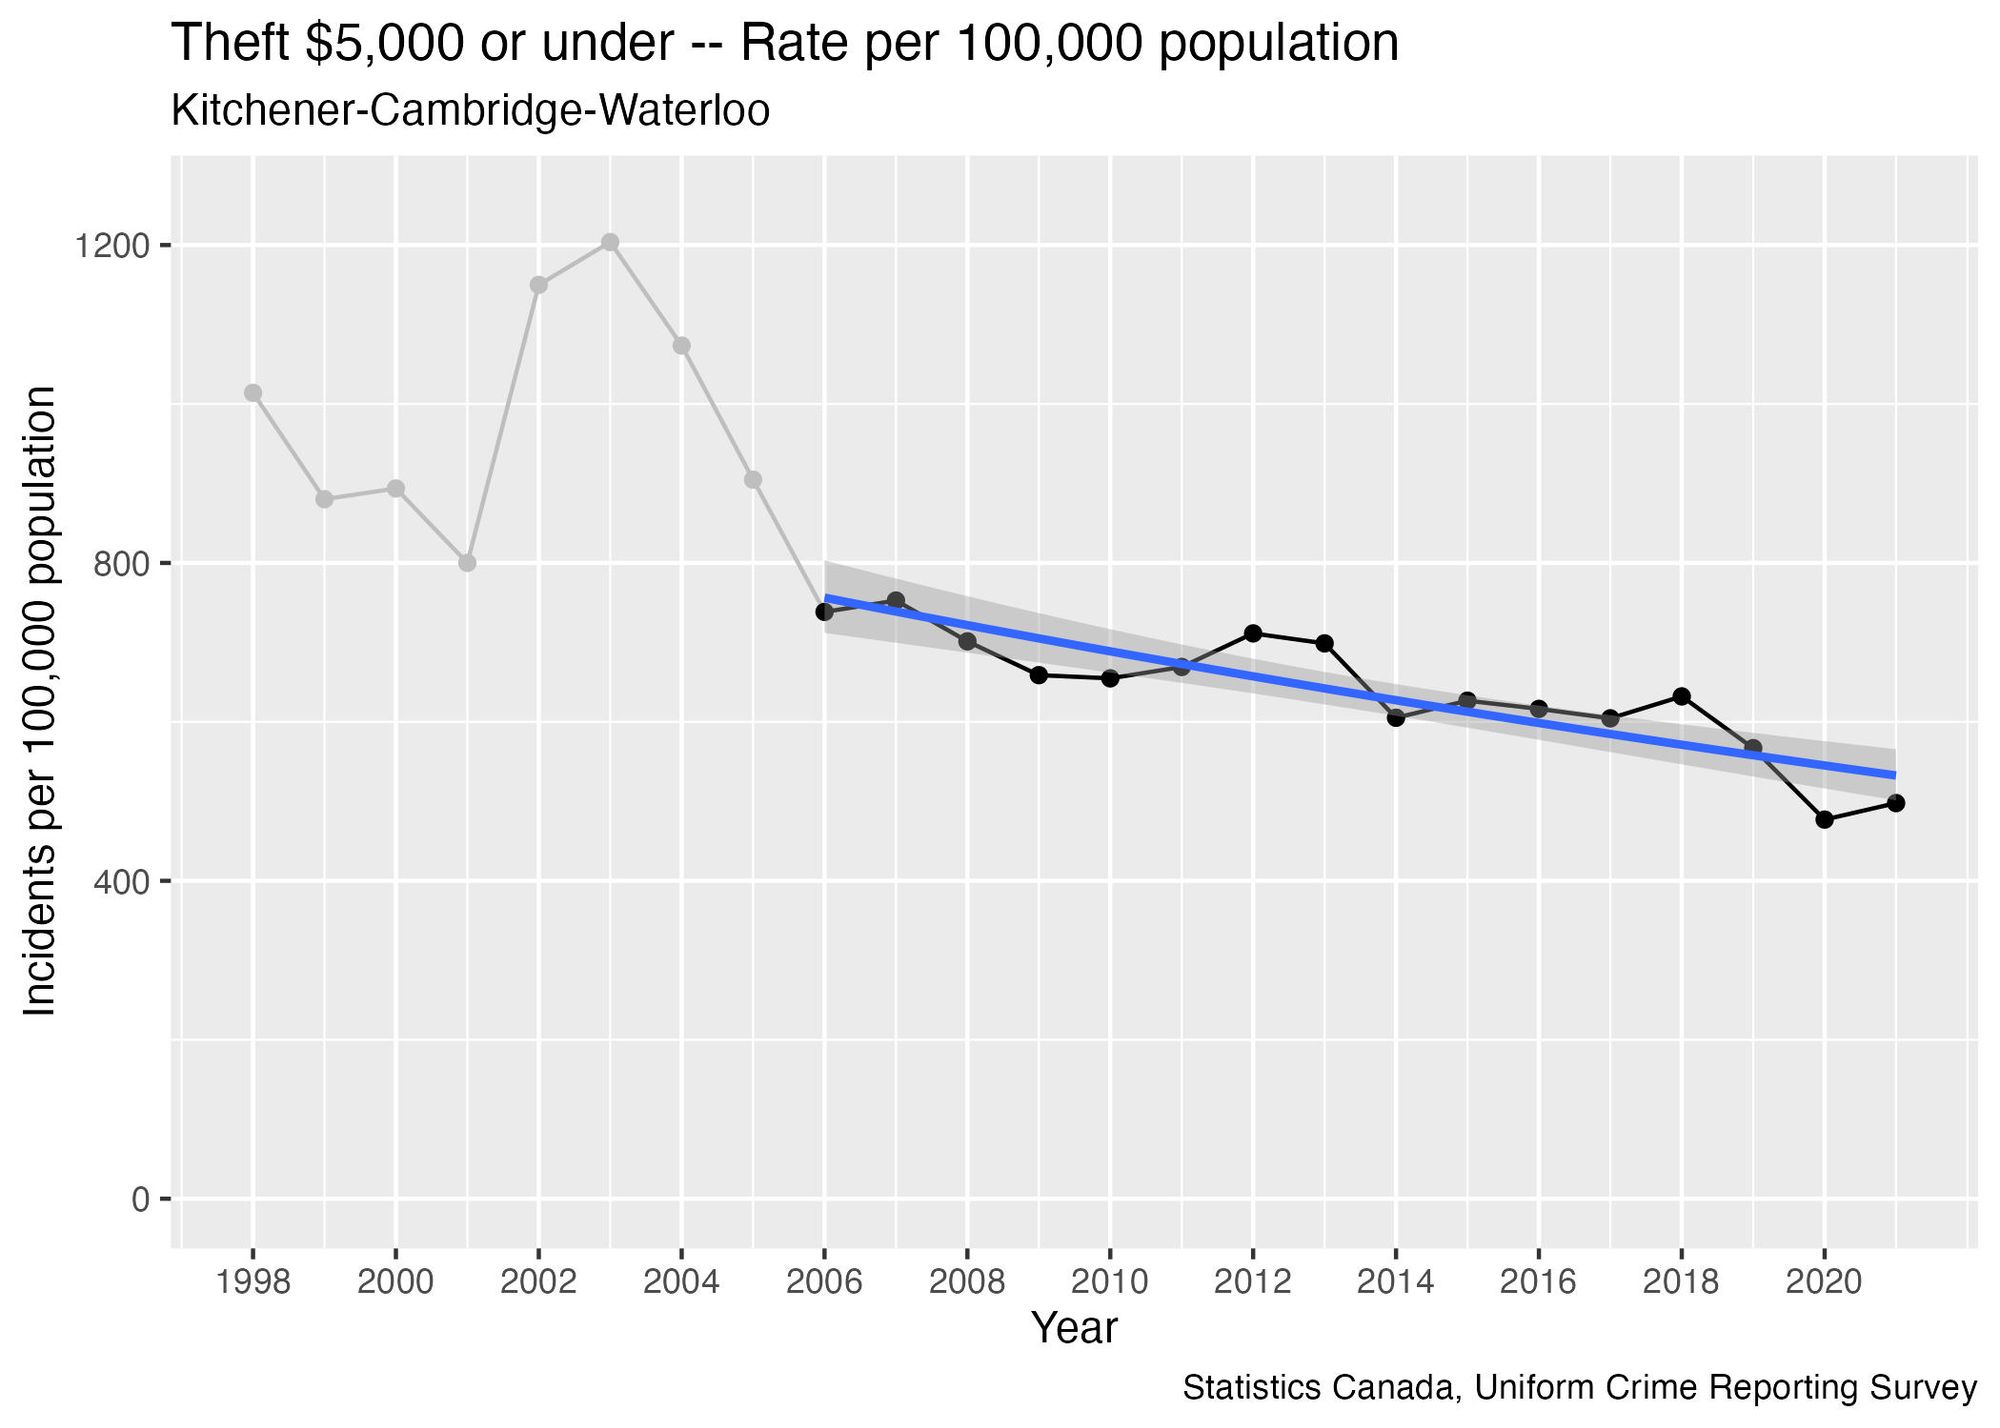 A graph of "Theft $5000 or under - rate per 100,000 population" for Kitchener-Cambridge-Waterloo. The graph starts at around 1000 incidents per 100K population in 1998. It spikes up to around 1200 in 2003, before rapidly dropping down to just below 800 in 2006. Points between 1998 and 2005 are greyed-out in the graph. Between 2006 and 2021 the graph gradually decreases to a level around 450 in 2021. There is a blue trend line with a decreasing slope along the years 2006 to 2021.